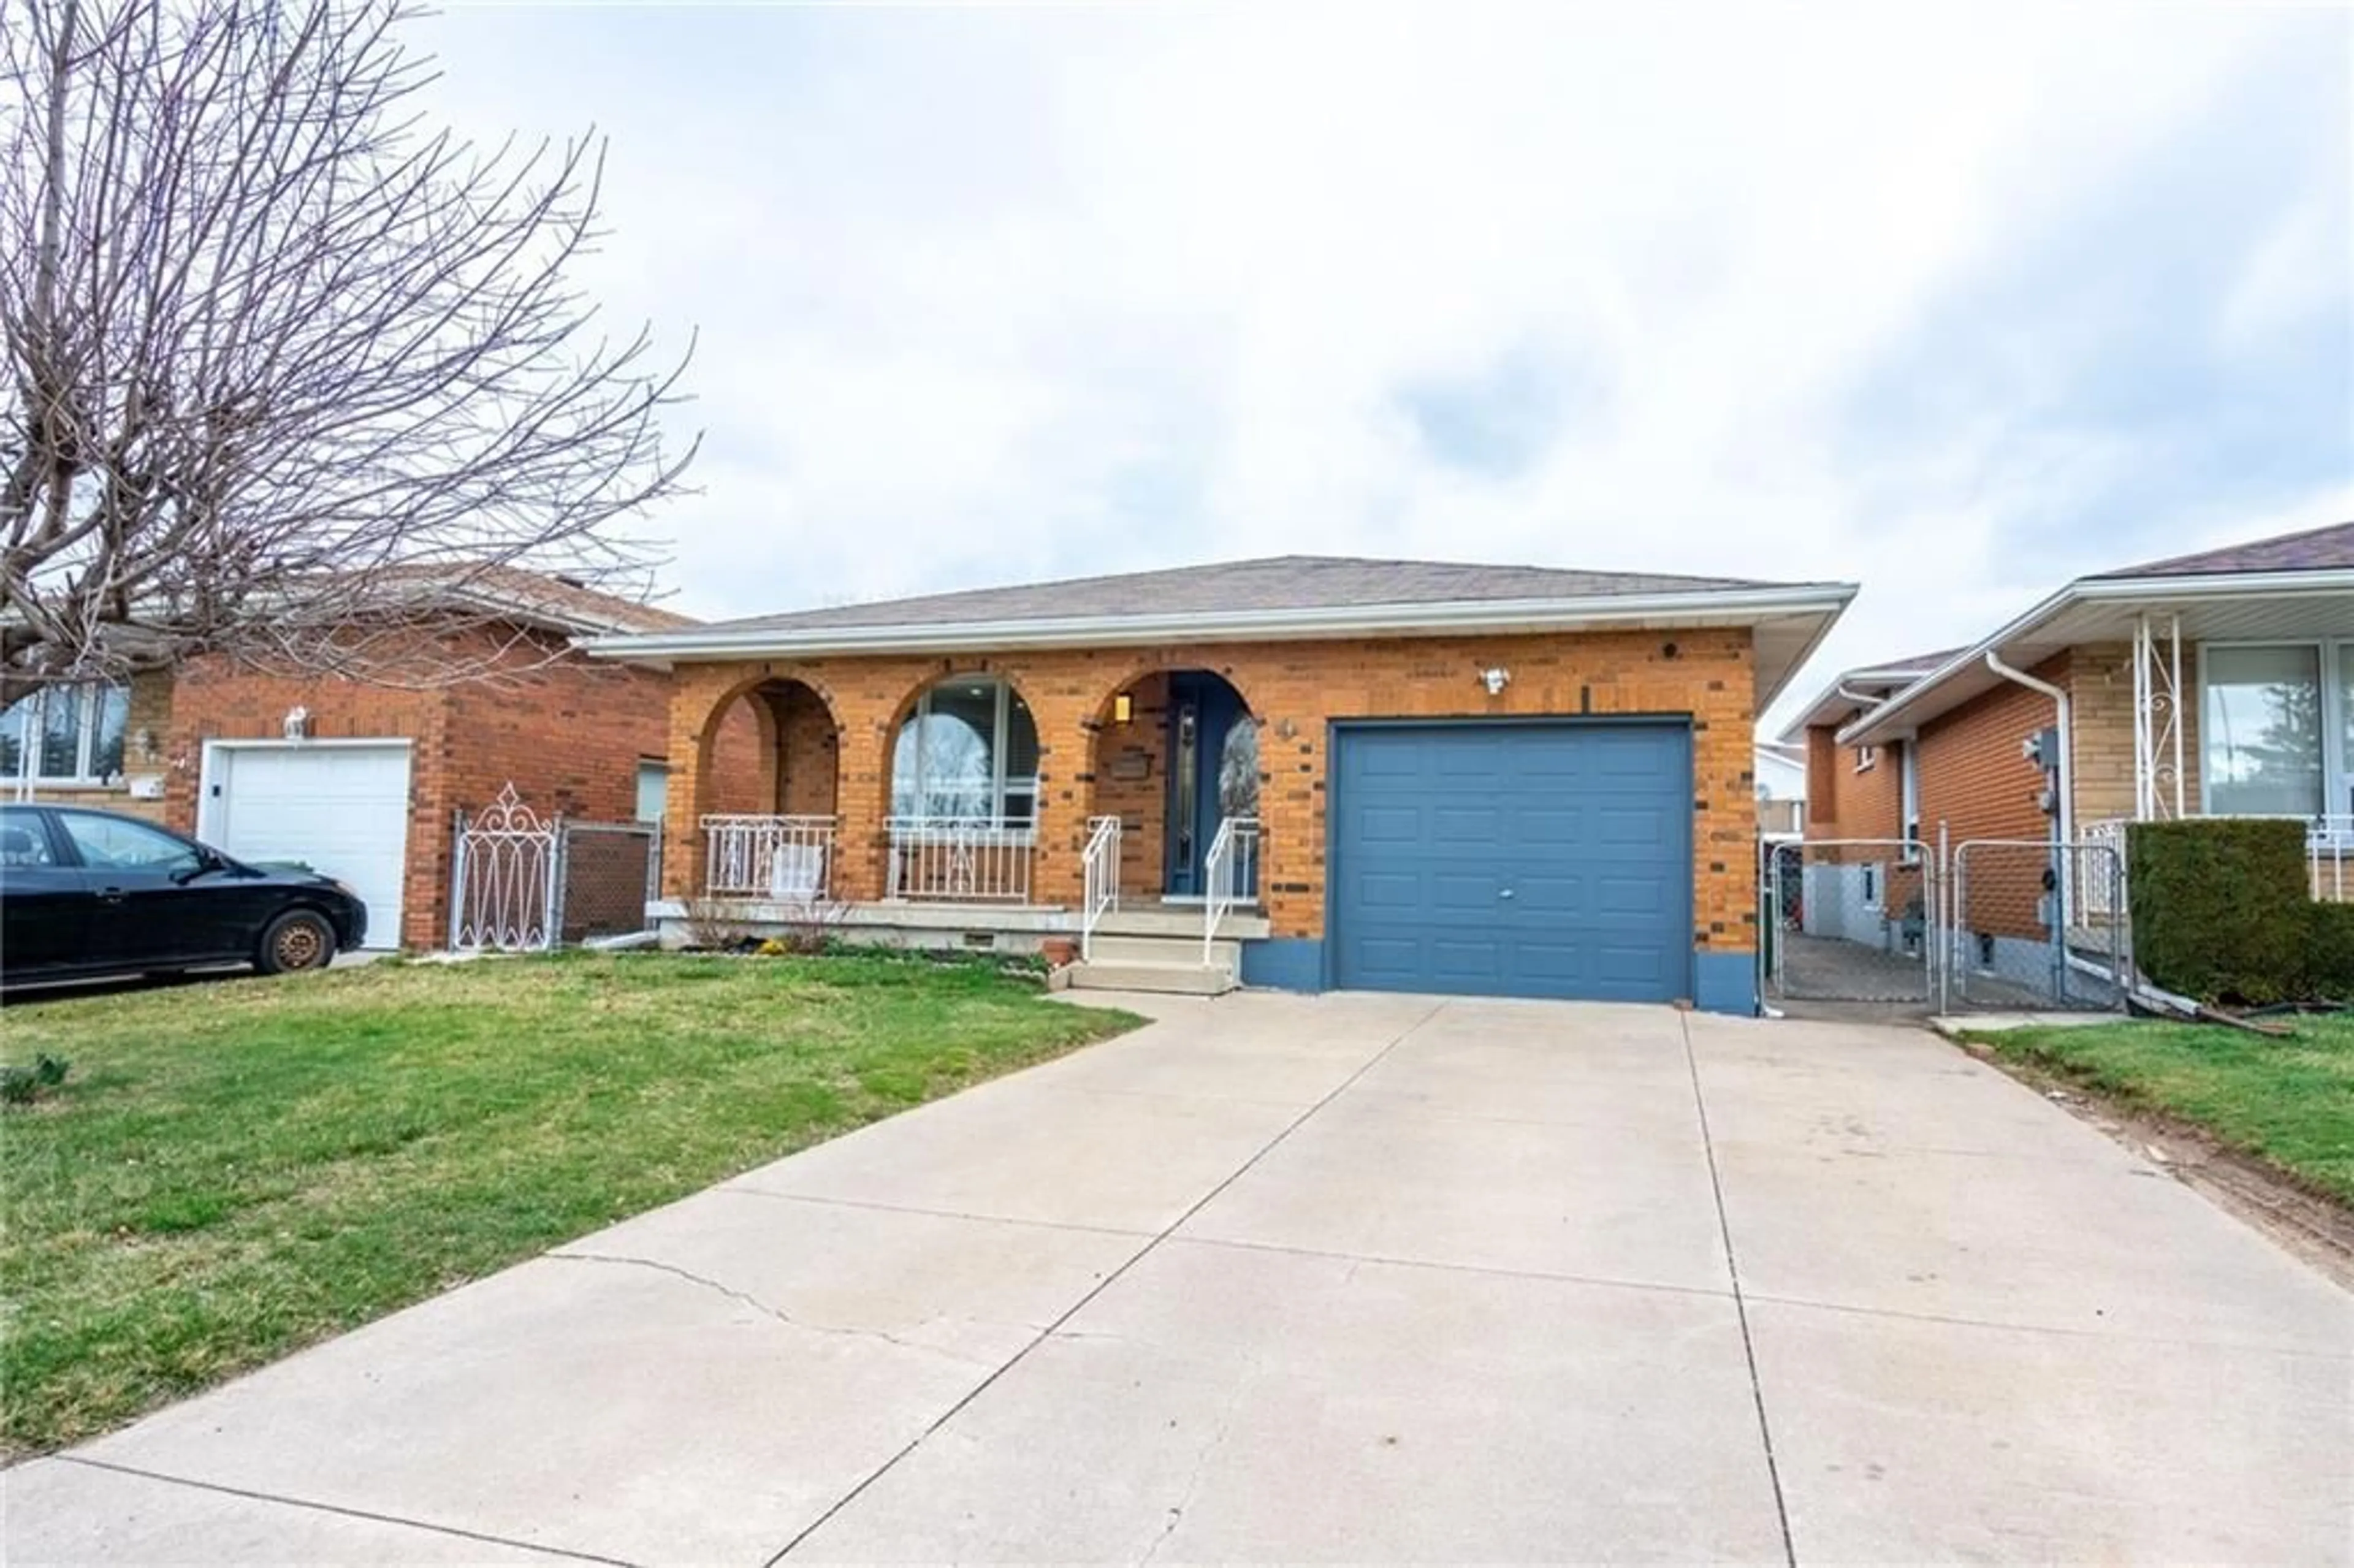 Home with brick exterior material for 9 DELAWANA Dr, Hamilton Ontario L8E 3N5